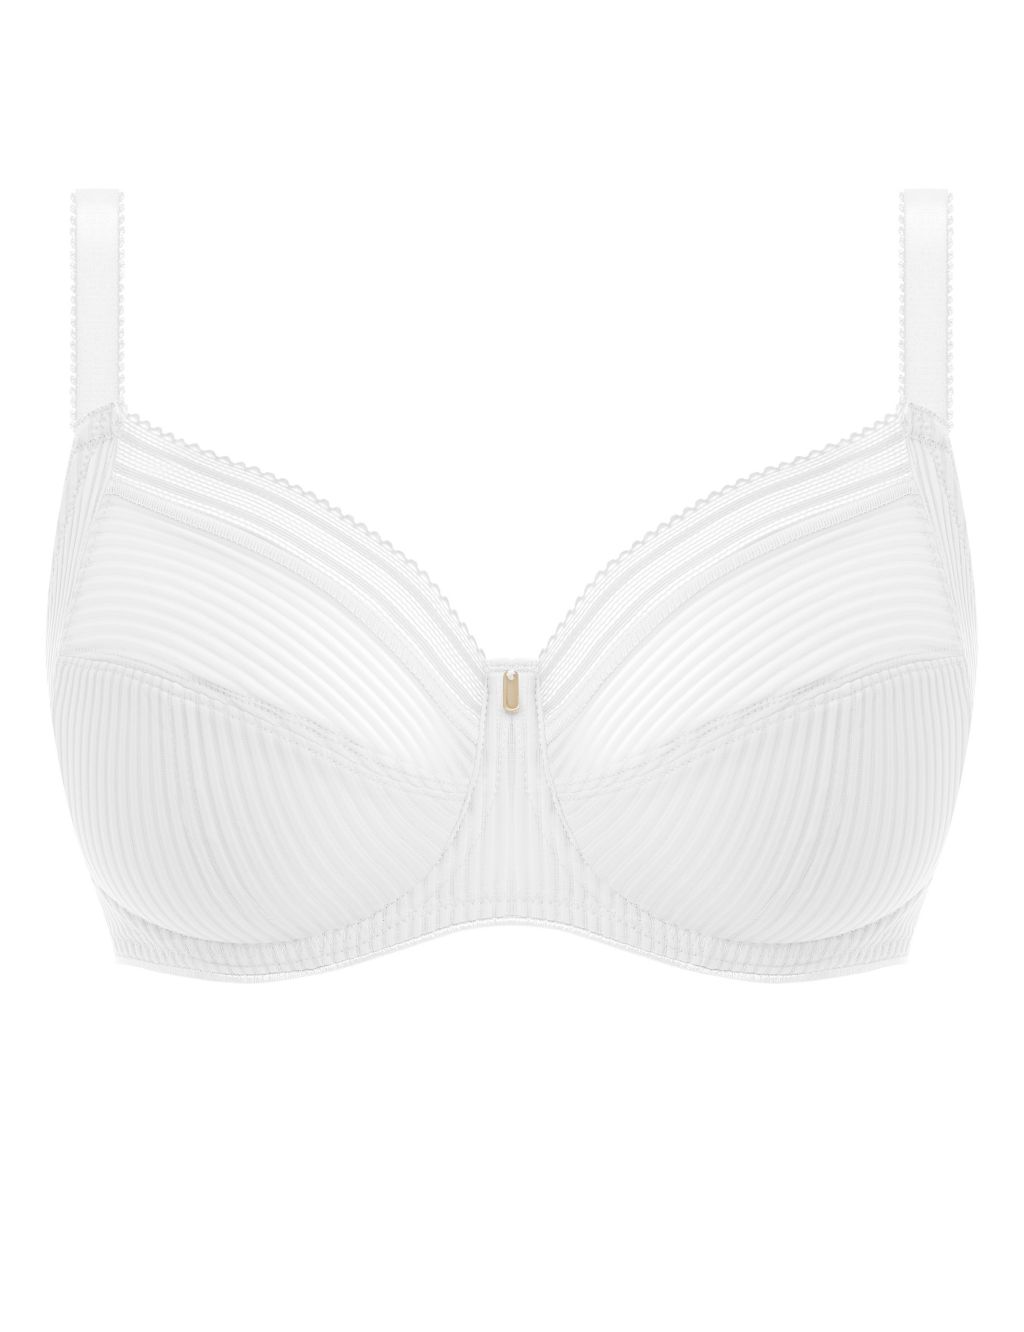 Fusion Wired Full Cup Side Support Bra D-HH image 2